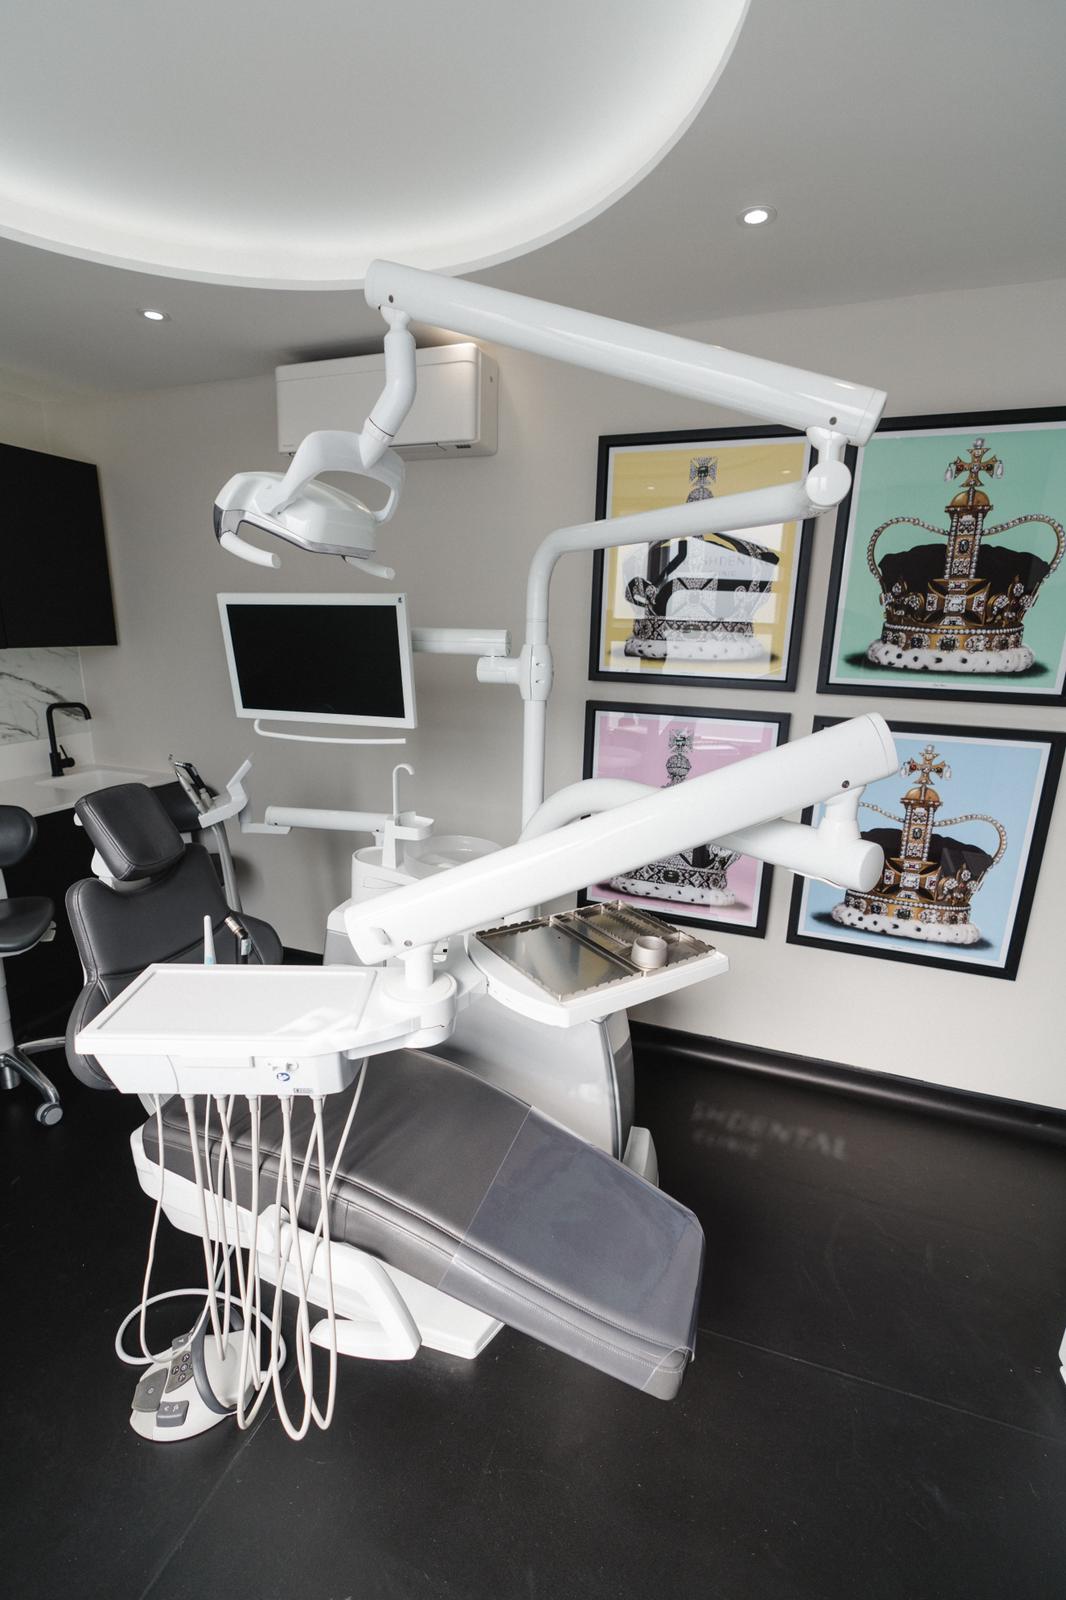 Take a look inside the new Freshdental Clinic and Institute